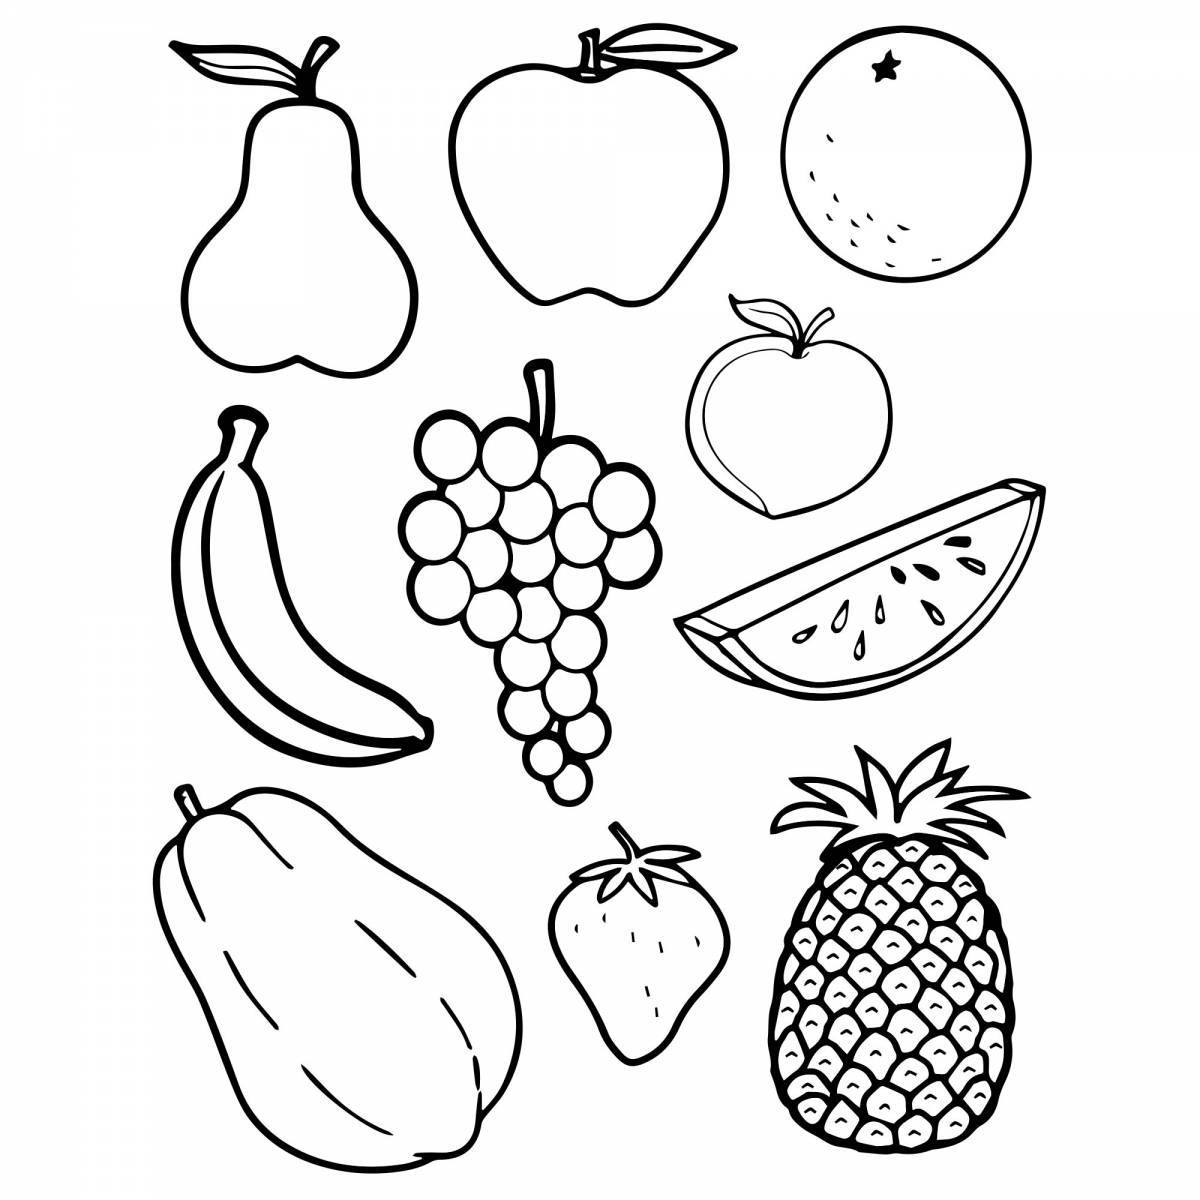 Fruits and vegetables for kids #6